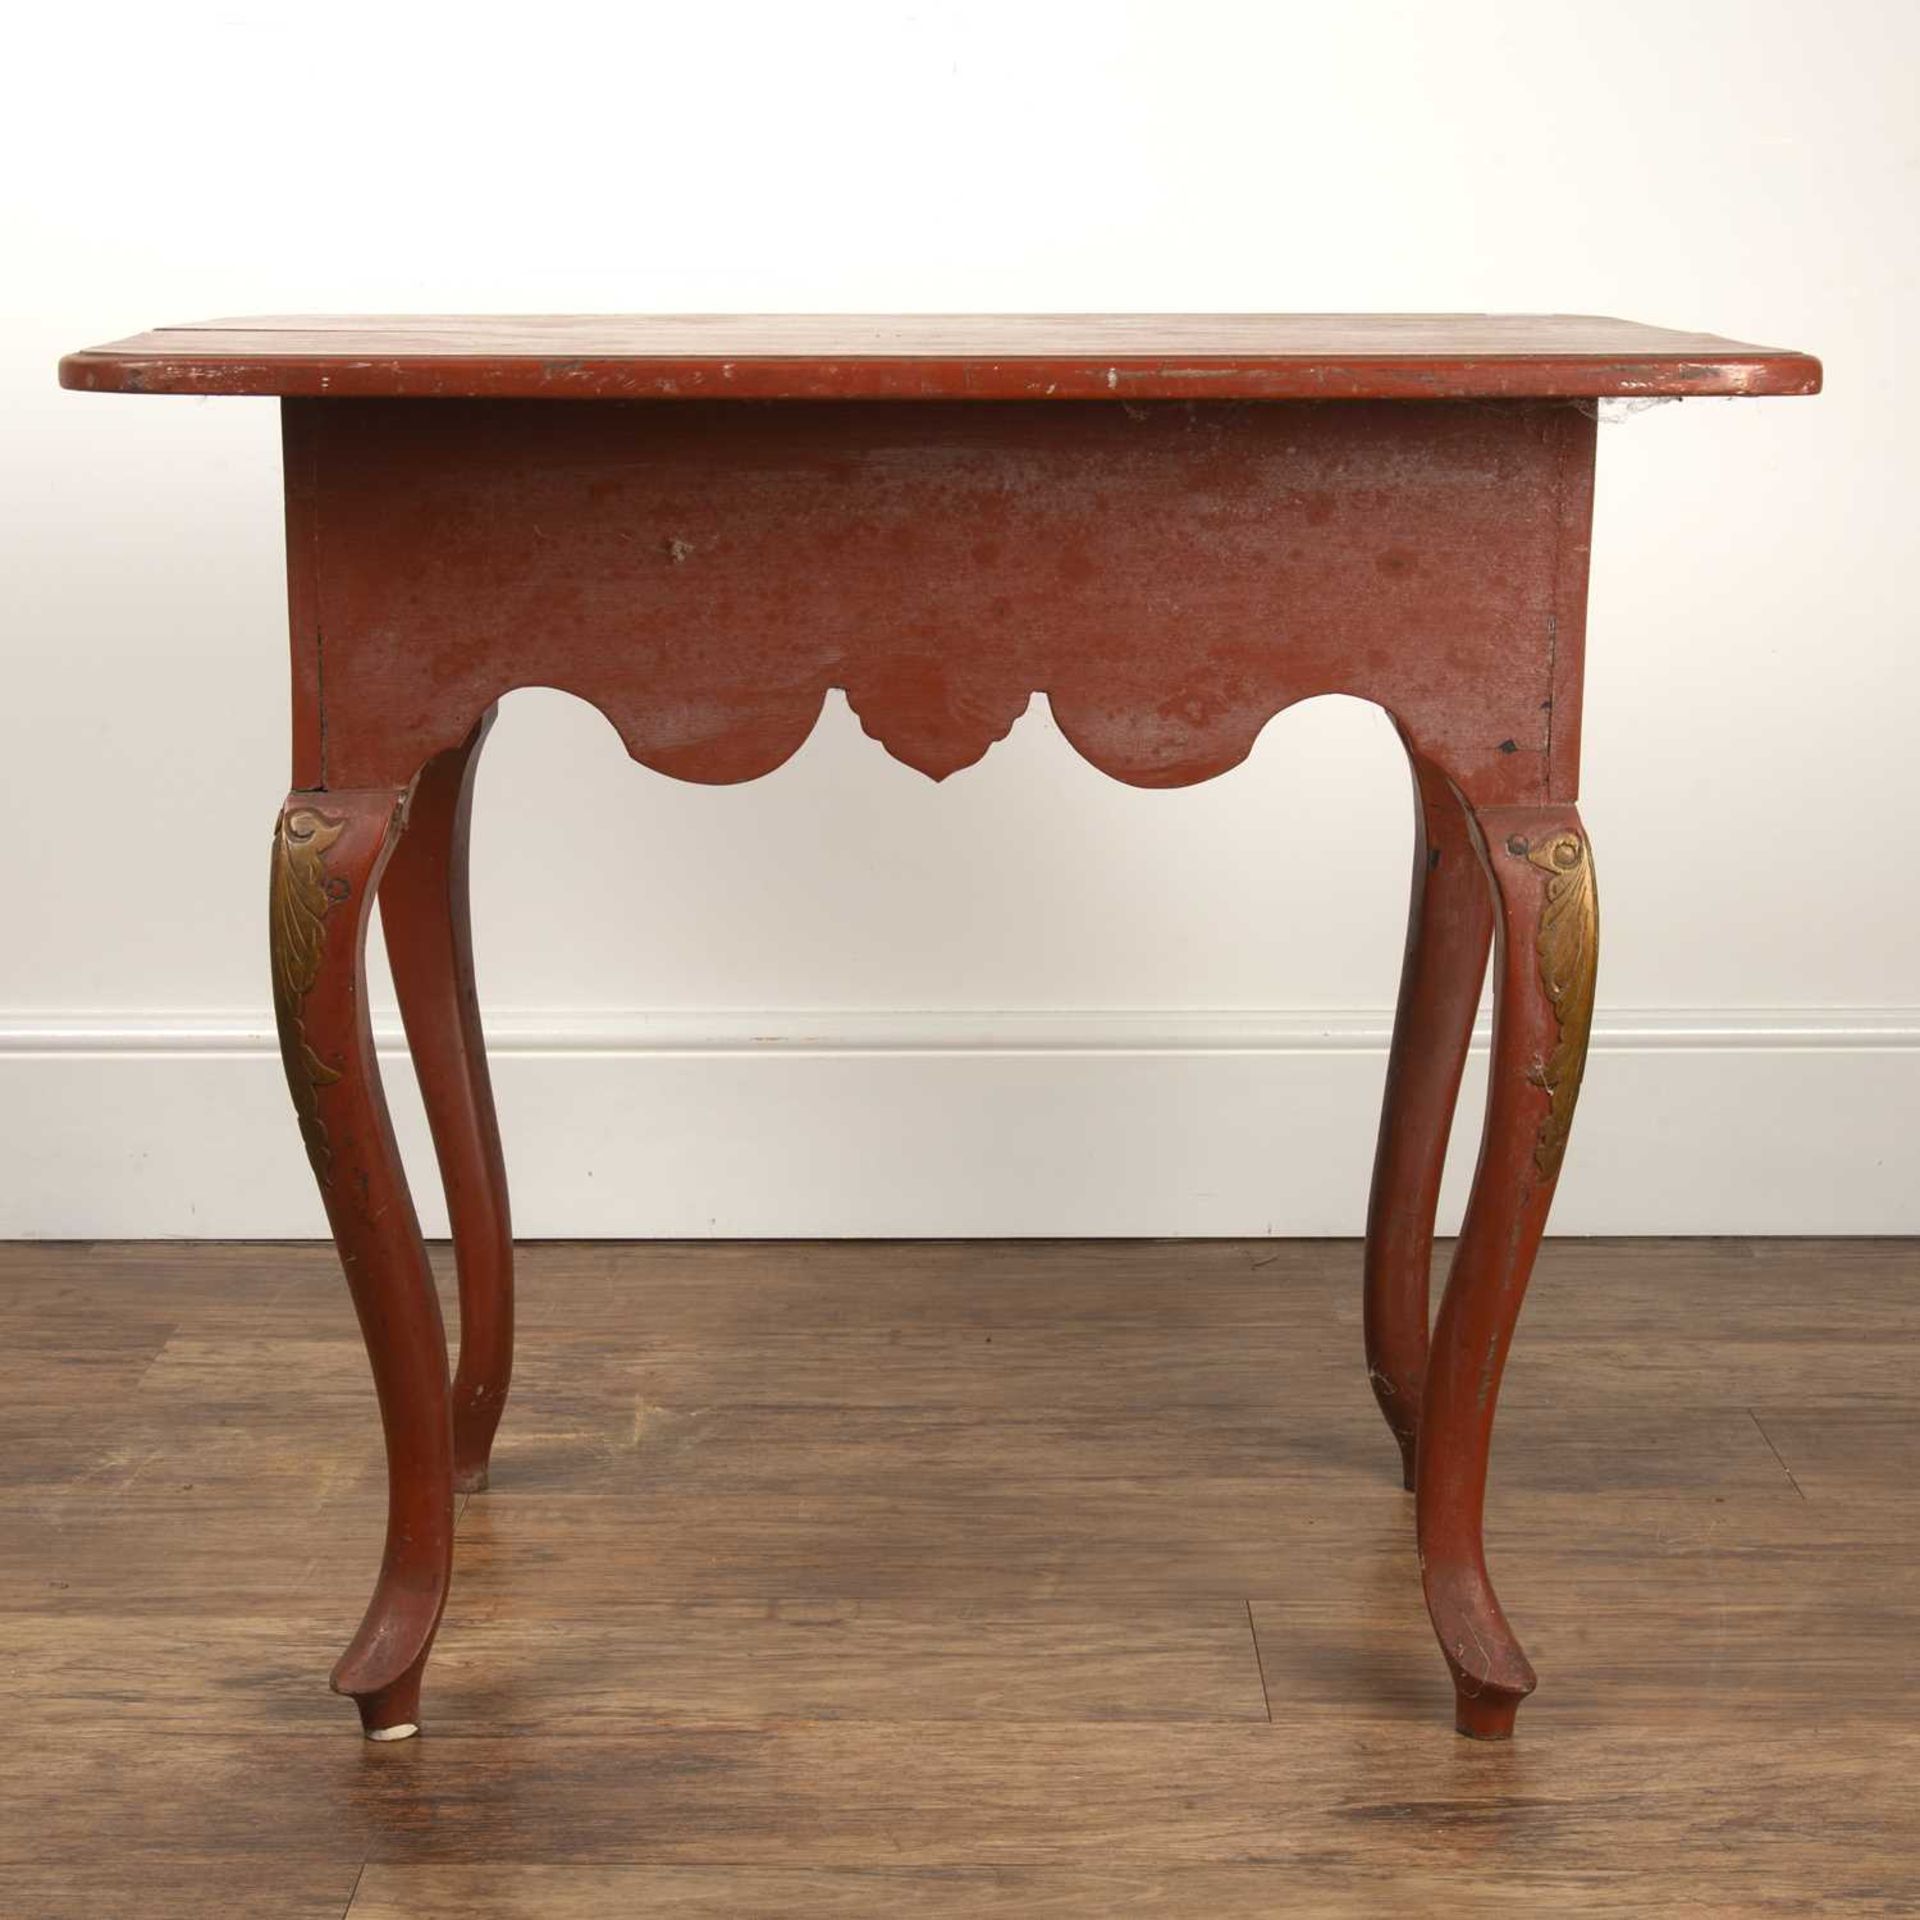 Red lacquered side or console table decorated in the Chinese taste with gold painted decoration, - Image 5 of 6